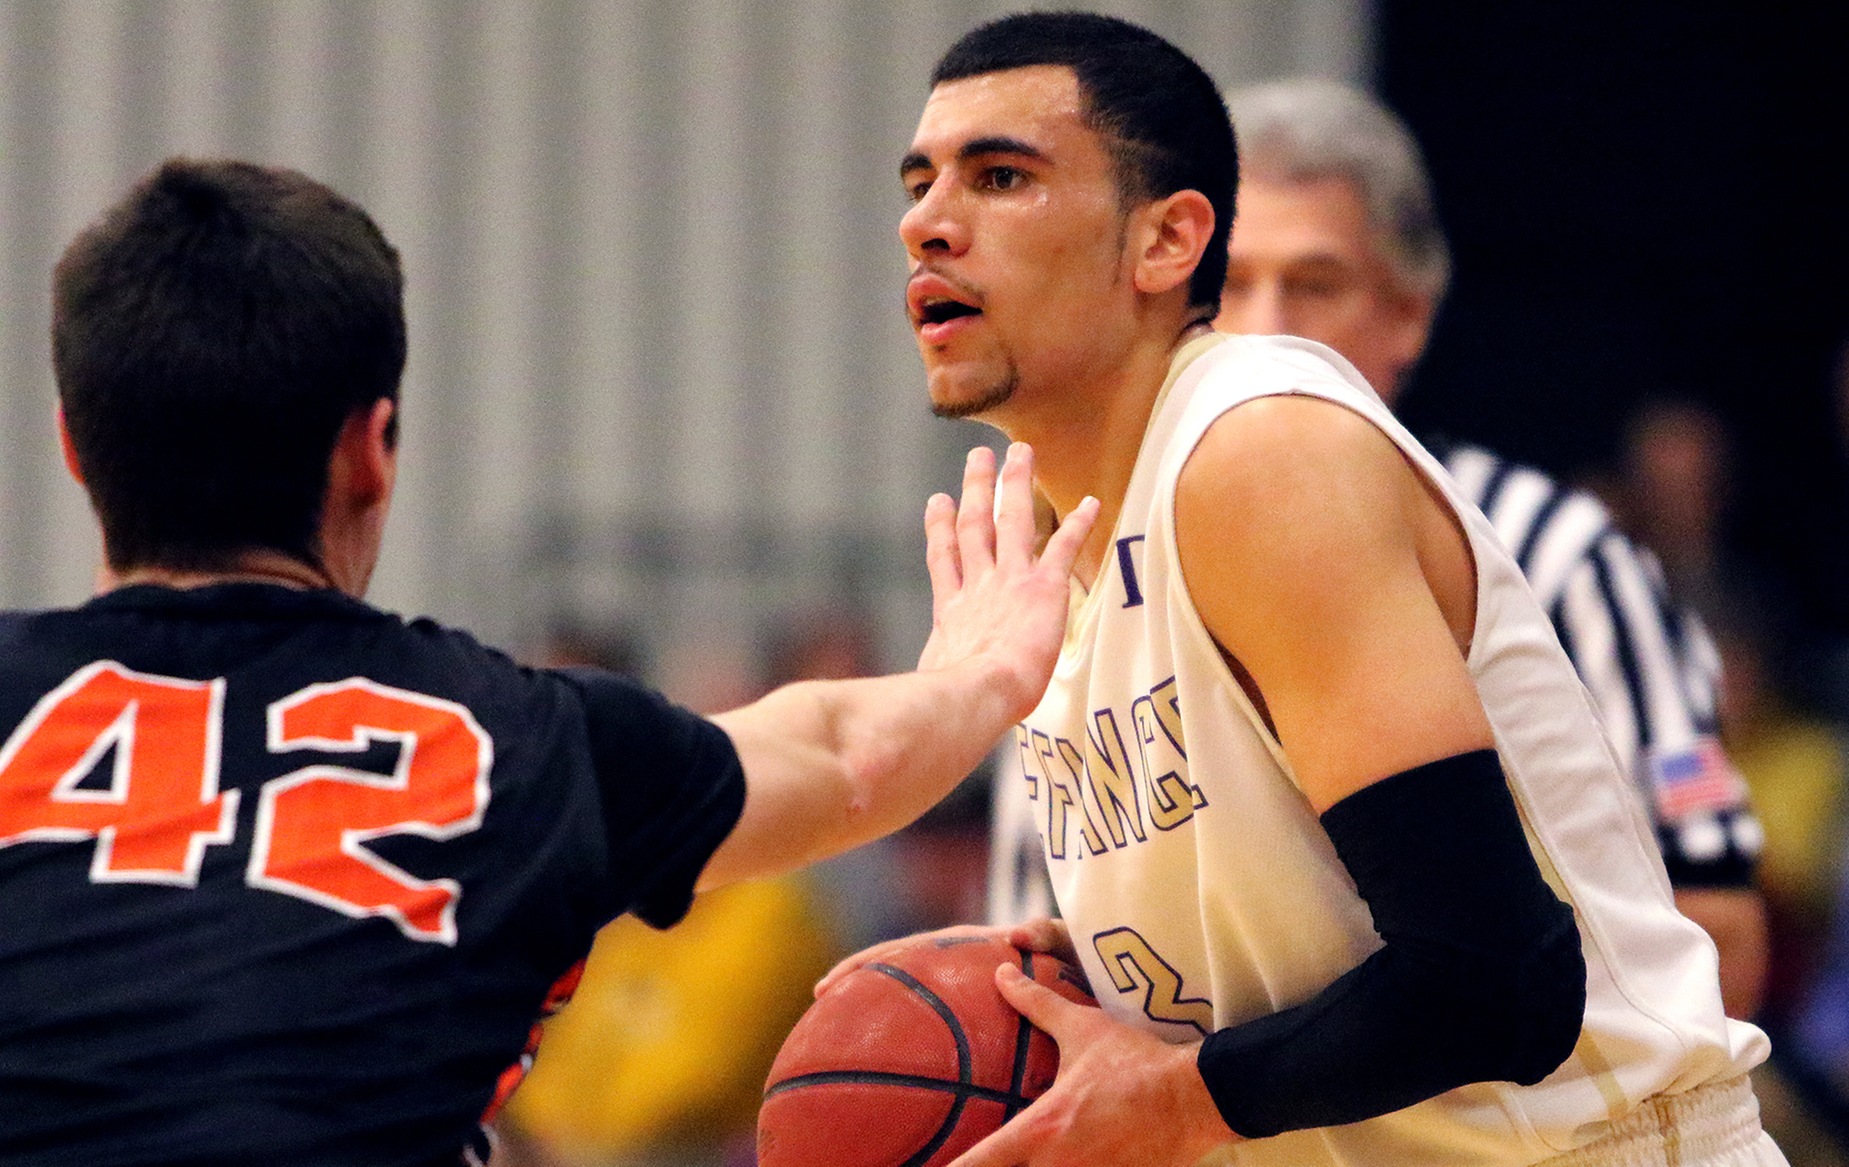 Jackets Rally to Beat Earlham Led By Career-High From Parker